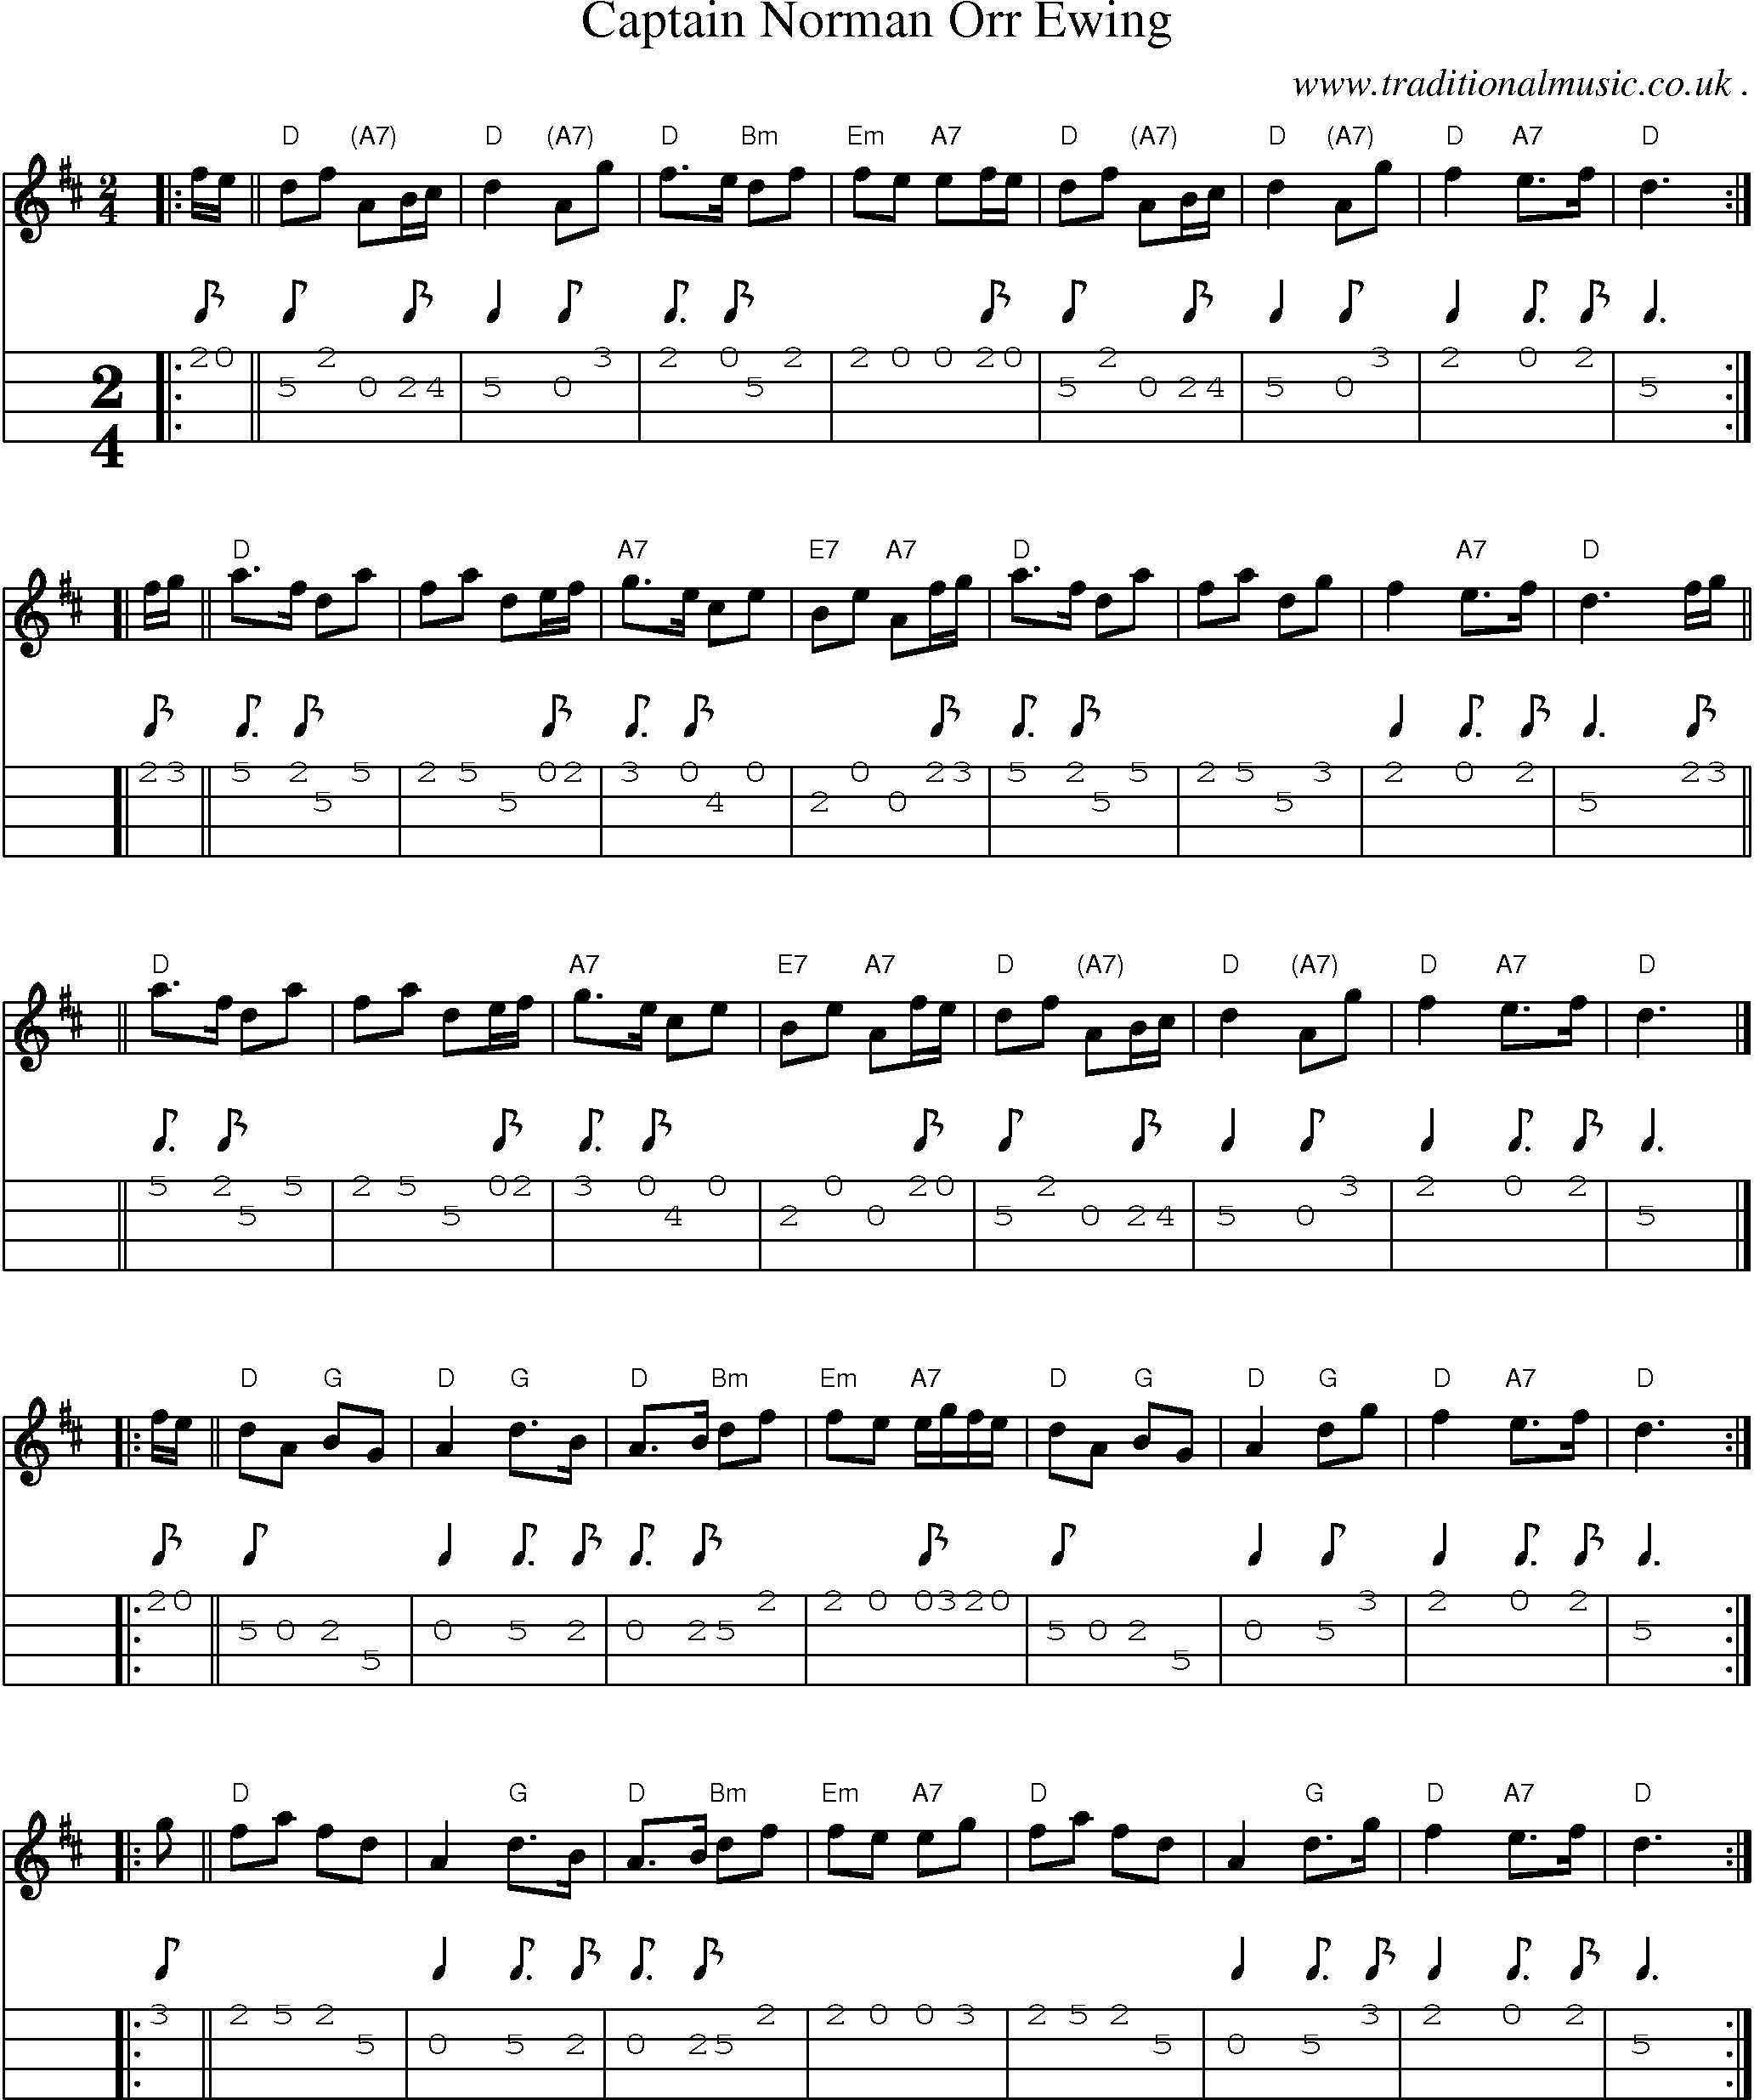 Sheet-music  score, Chords and Mandolin Tabs for Captain Norman Orr Ewing